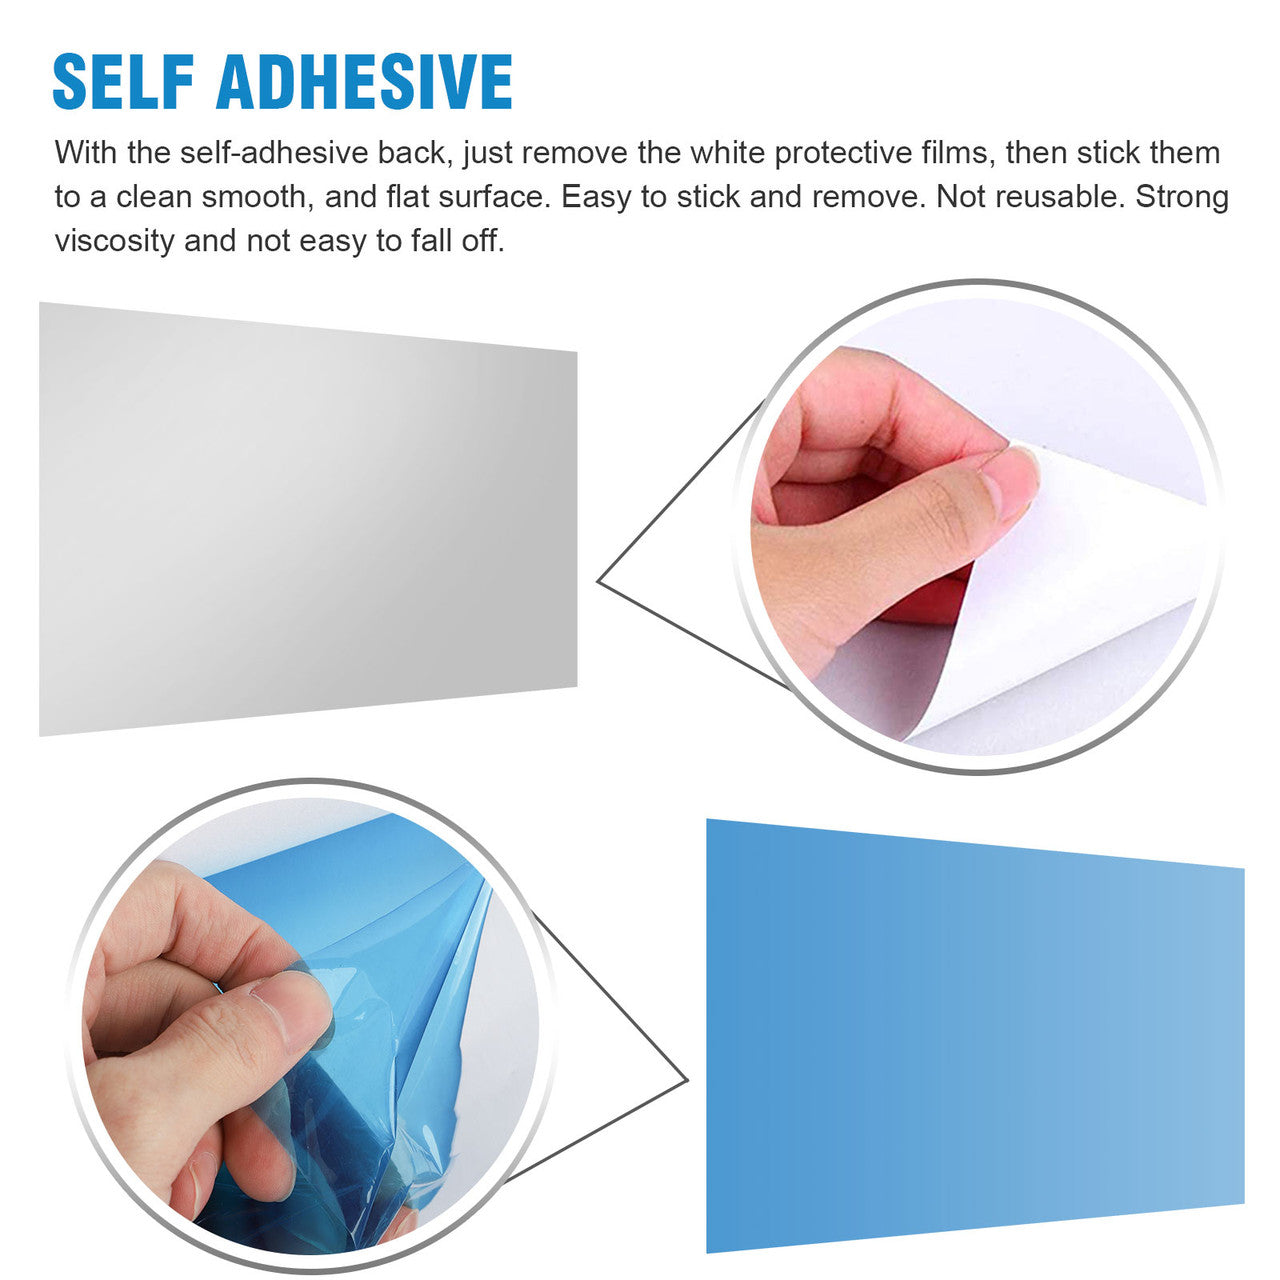 Self-Adhesive Mirror Sheets, Flexible Mirror Wall Stickers, Soft Non-Glass PET Cuttble DIY Wall Mirror Effect Reflective Sticker for Home Bathroom Bedroom Living Room Safety Decor - 50x100cm